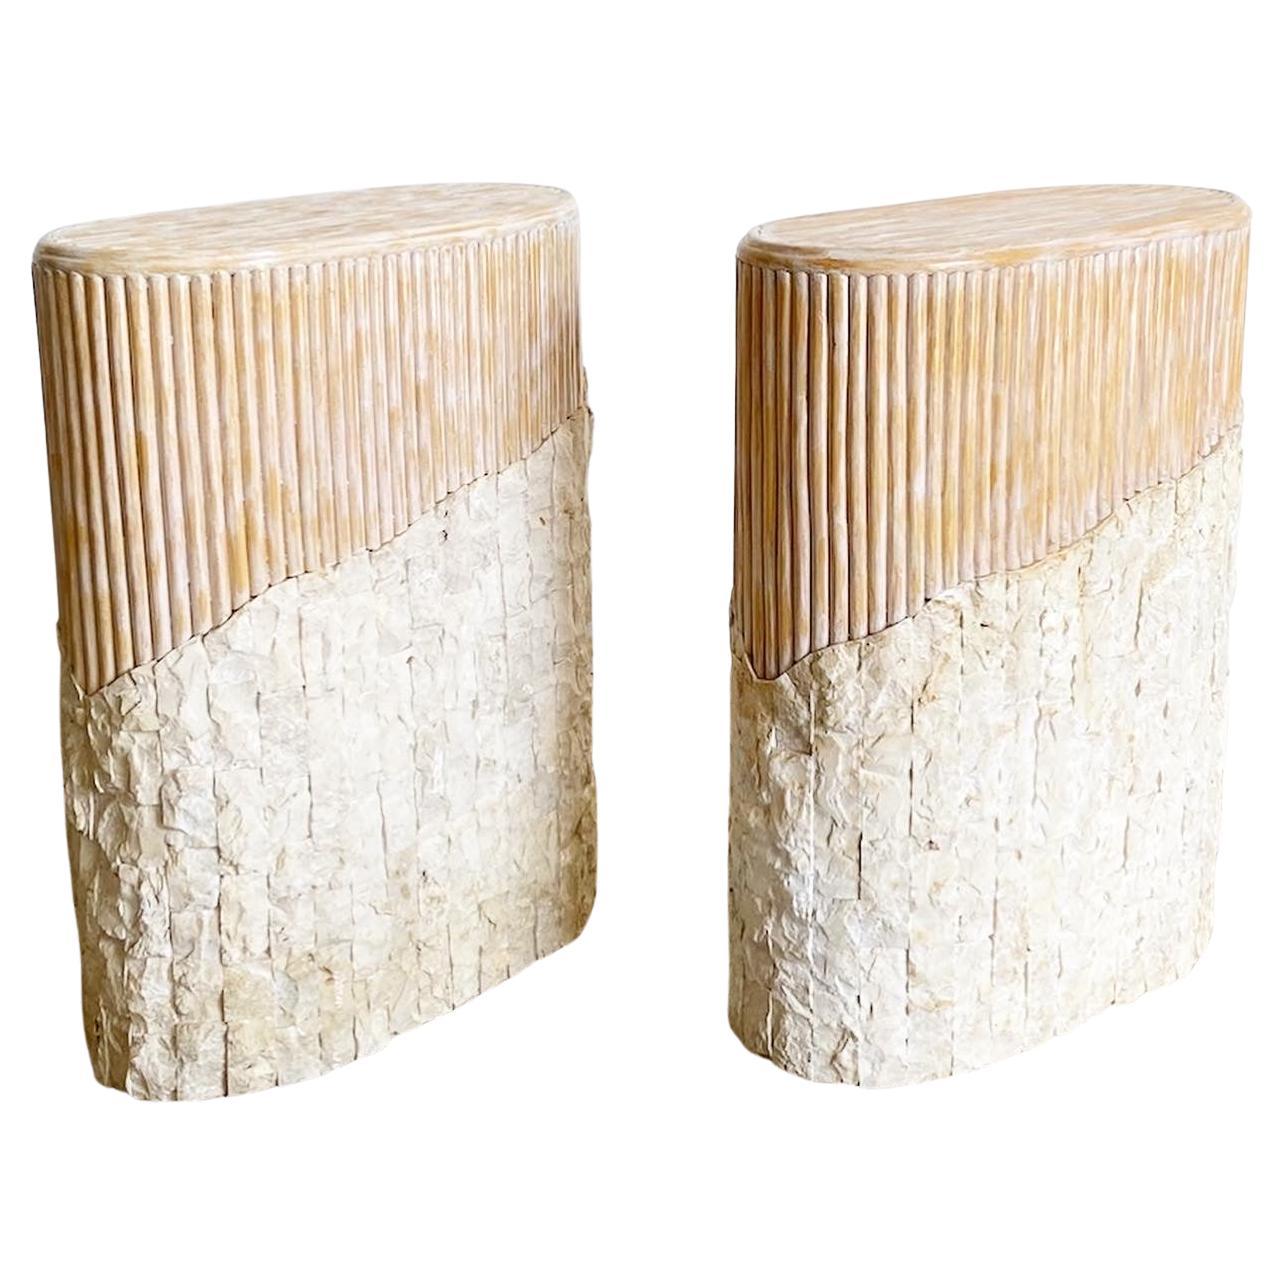 Boho Chic Tessellated Stone and Split Reed Pedestals, a Pair